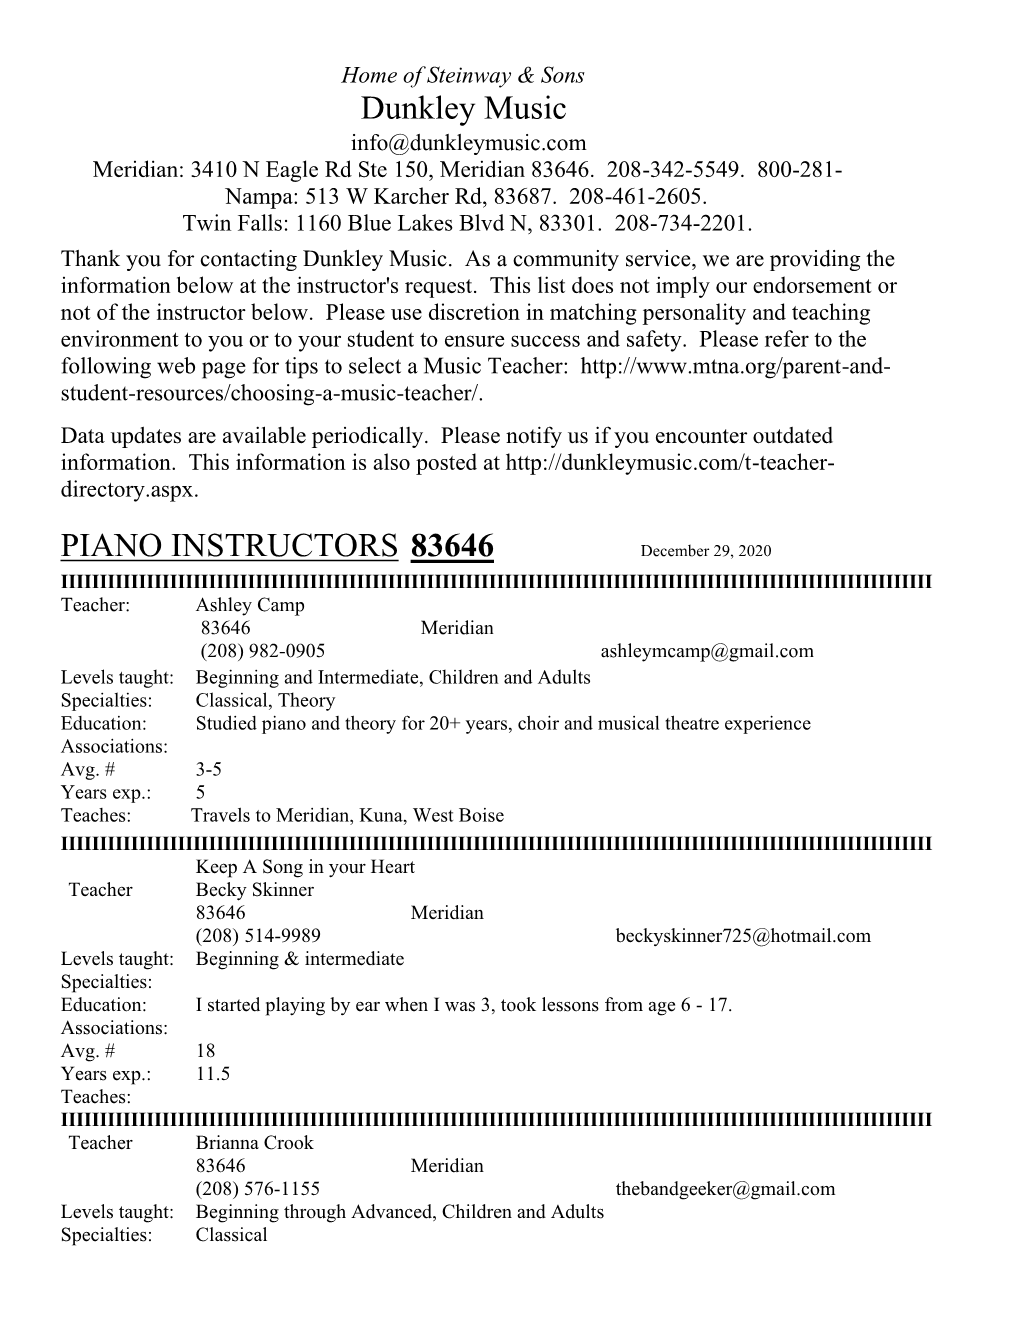 Dunkley Music PIANO INSTRUCTORS 83646